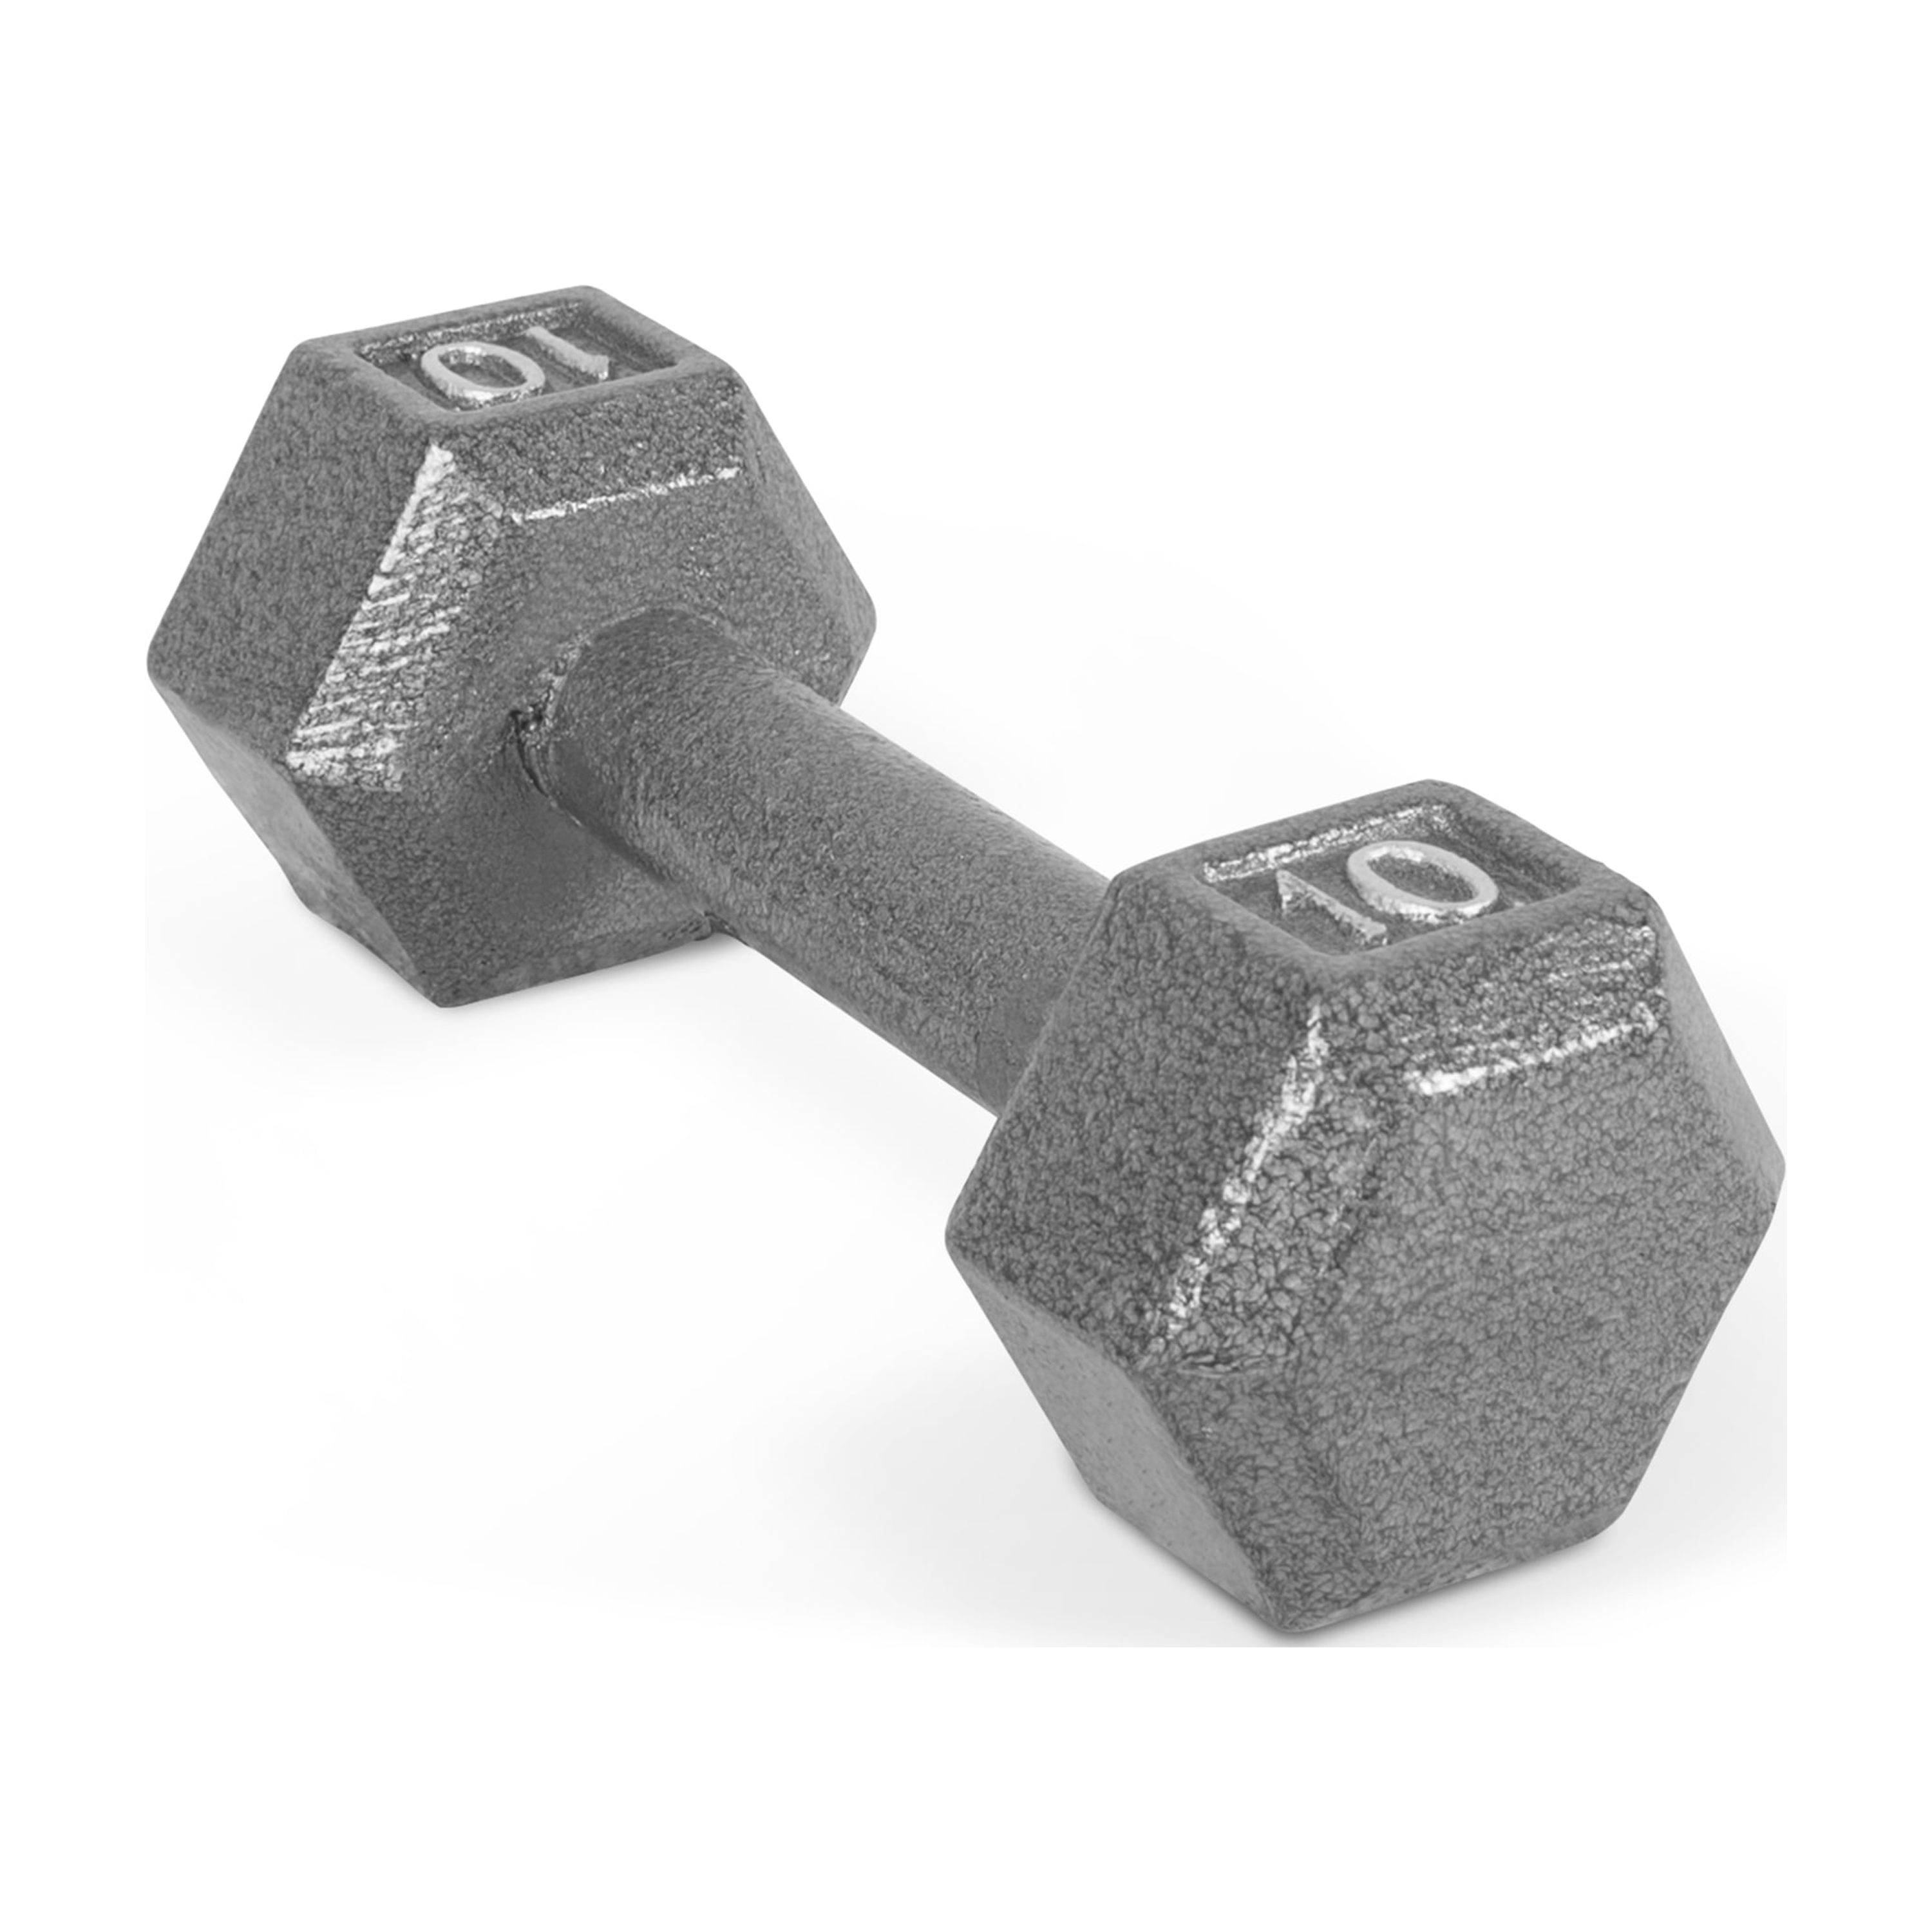 CAP Barbell 10lb Cast Iron Hex Dumbbell, Single - image 1 of 6